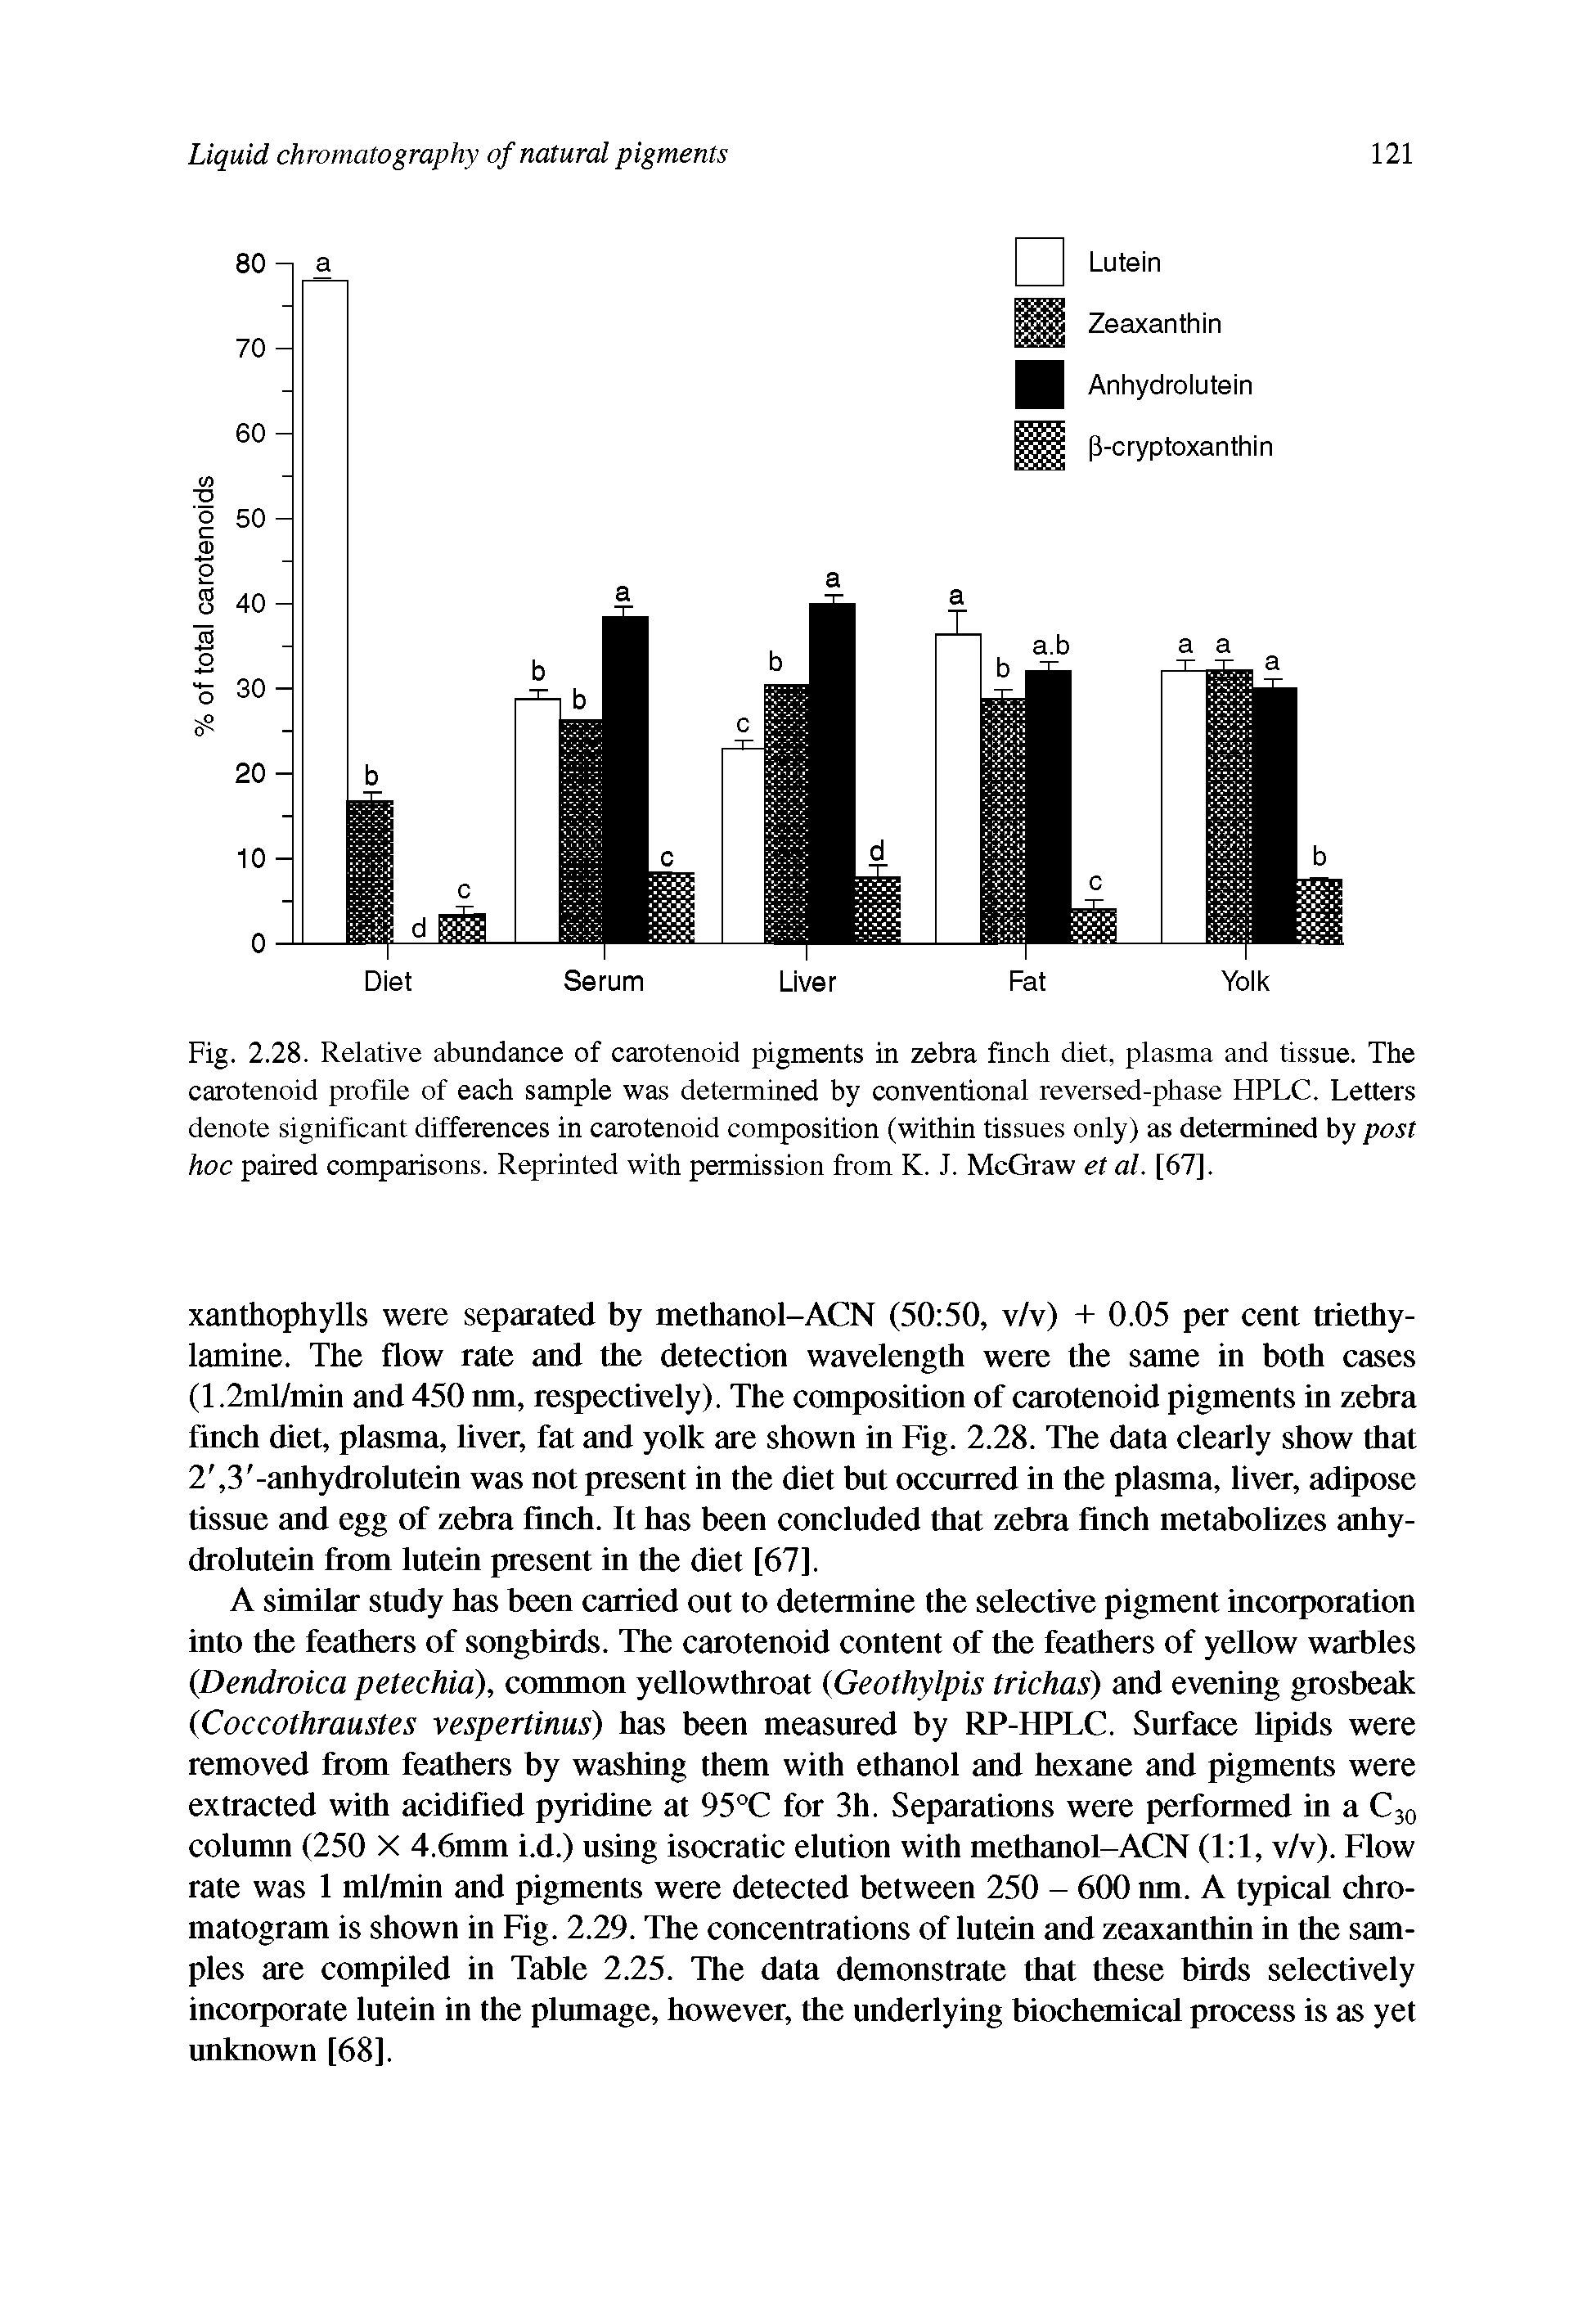 Fig. 2.28. Relative abundance of carotenoid pigments in zebra finch diet, plasma and tissue. The carotenoid profile of each sample was determined by conventional reversed-phase HPLC. Letters denote significant differences in carotenoid composition (within tissues only) as determined by post hoc paired comparisons. Reprinted with permission from K. J. McGraw et al. [67].